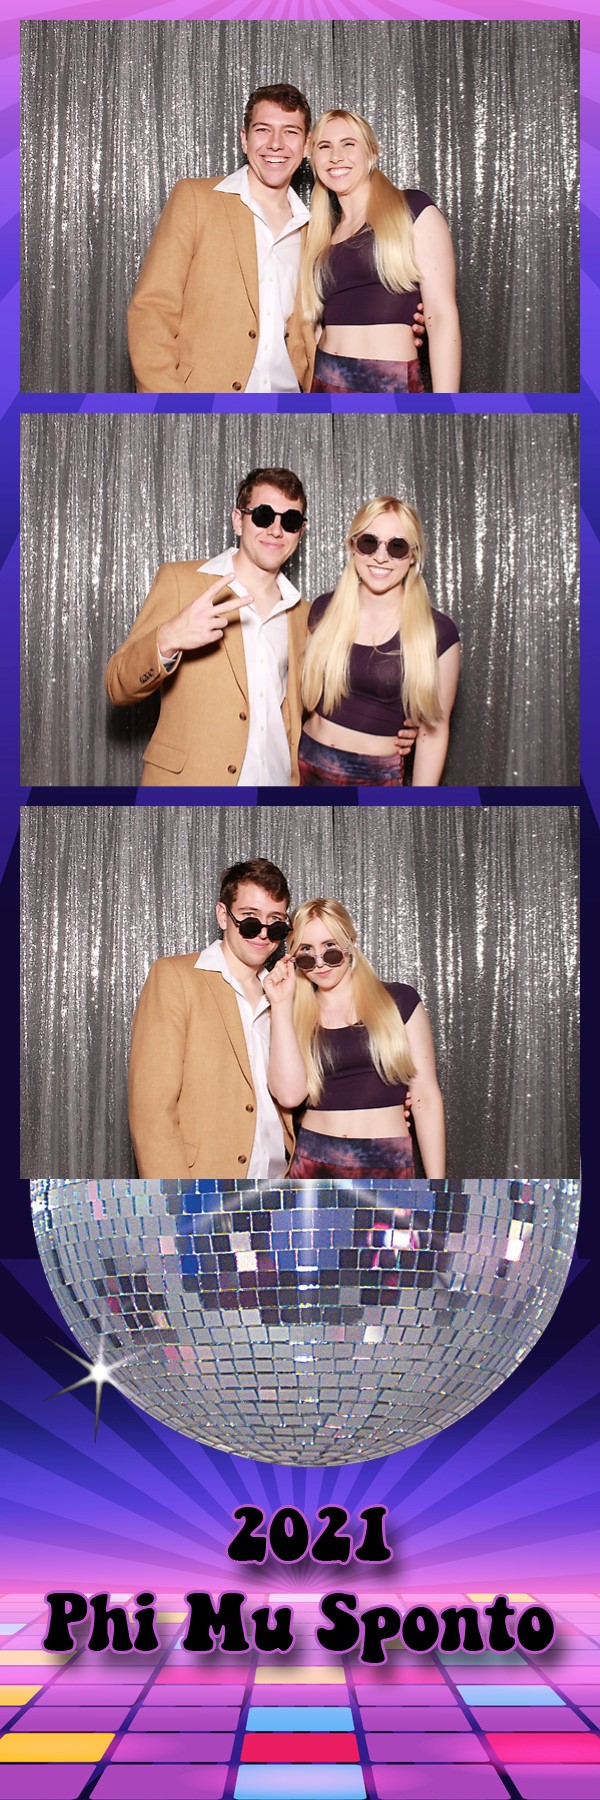 Disco Themed Photo Booth